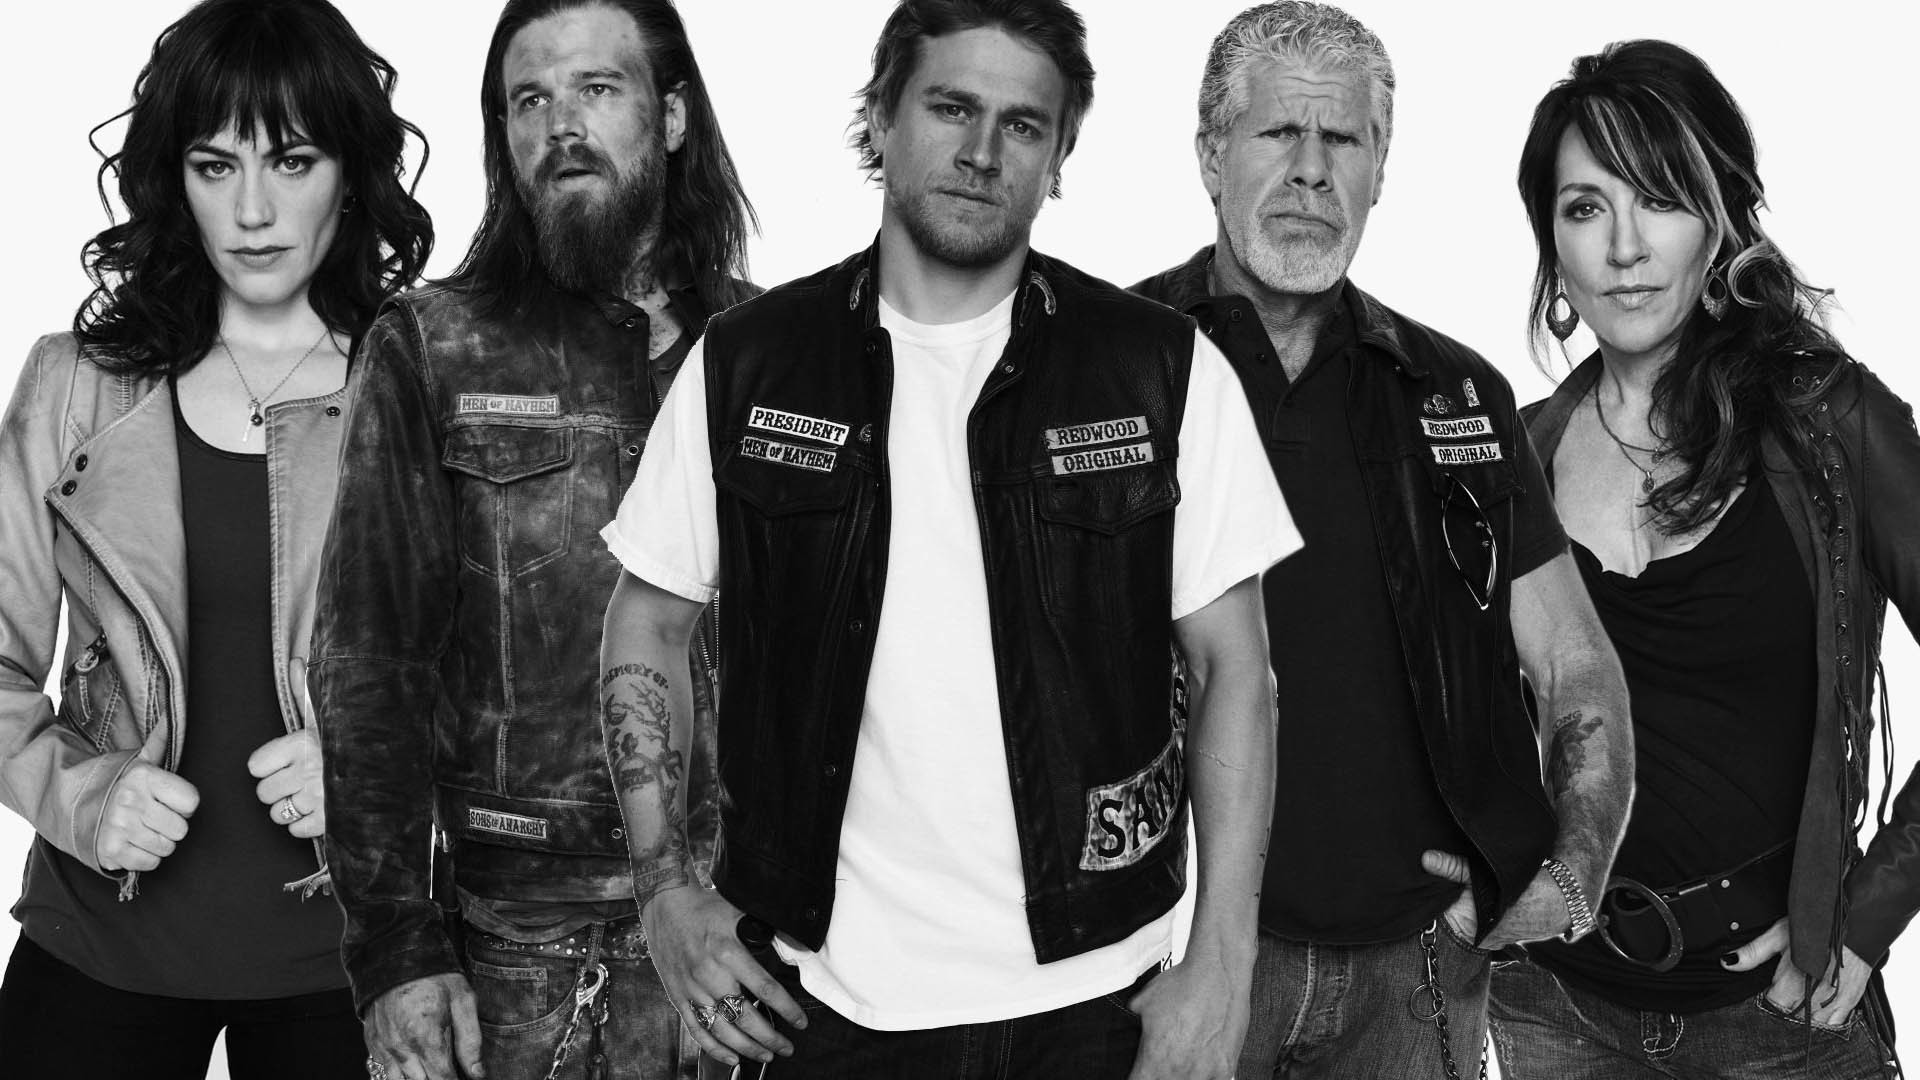 Sons of anarchy wallpaper 4 wallpapersbq